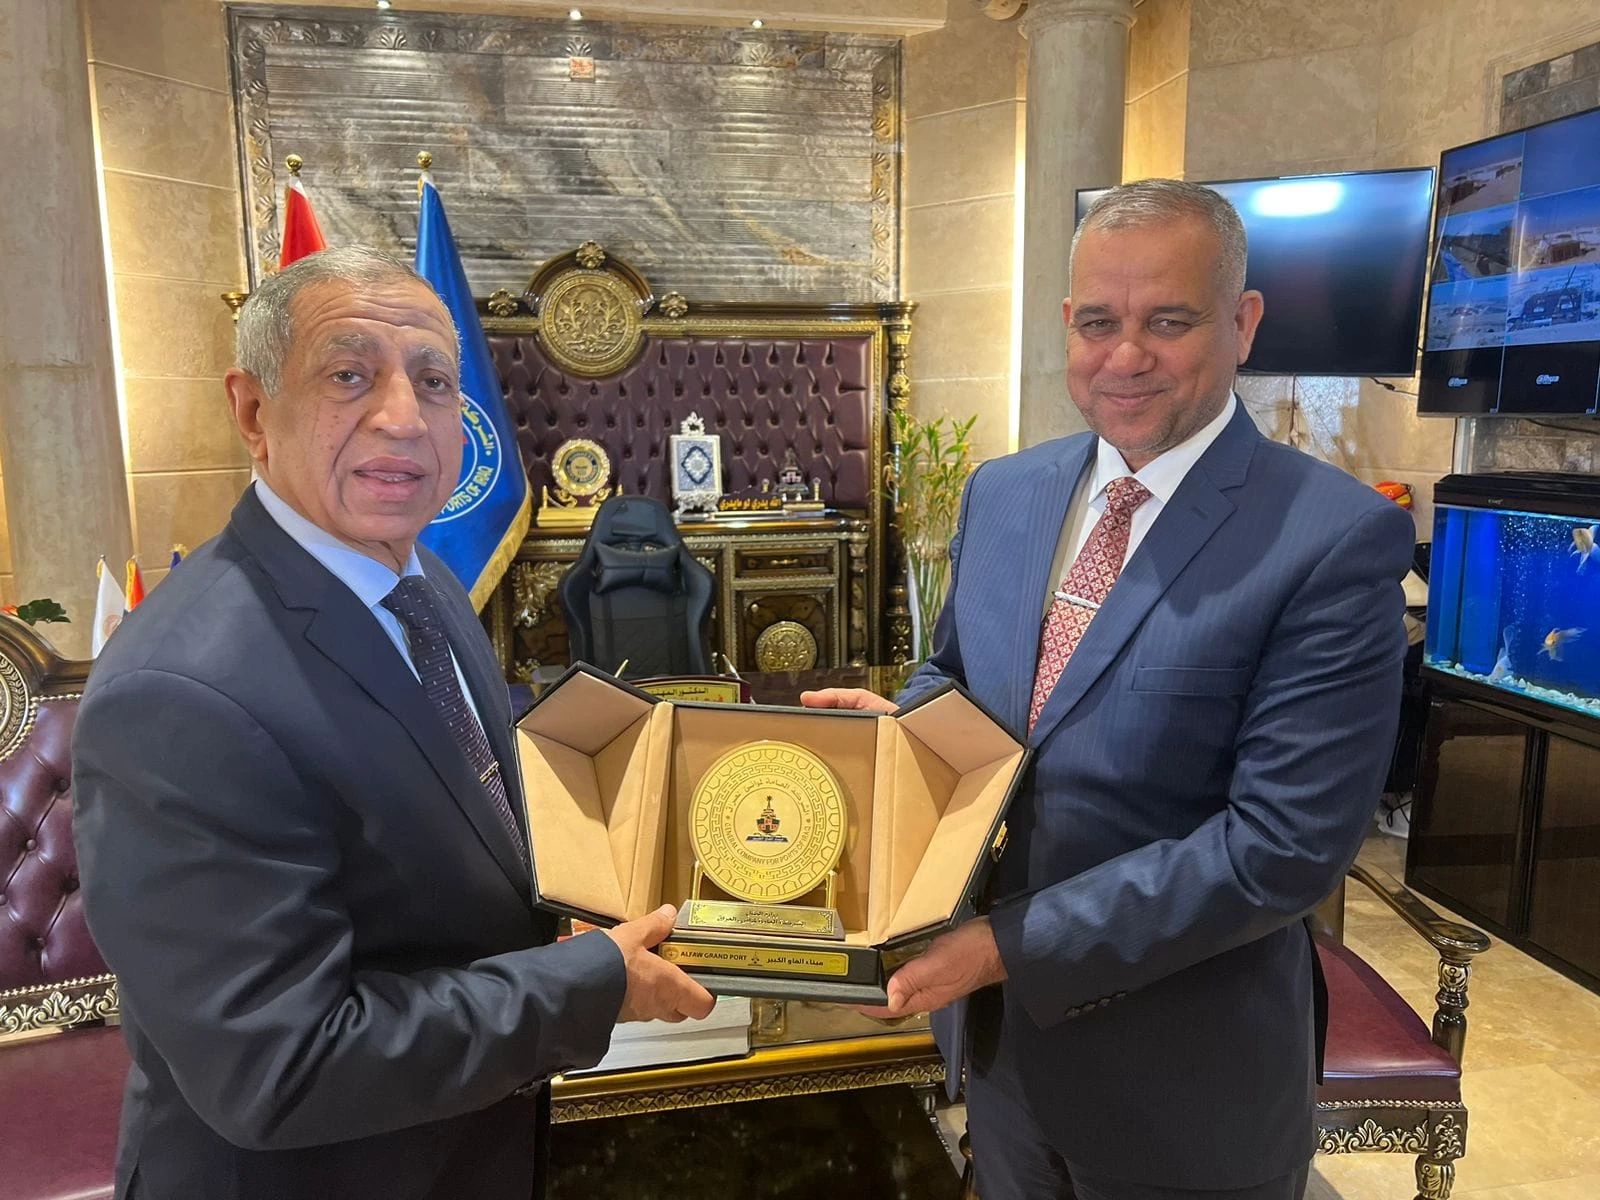 Meeting of the President of Arab Academy for Science, Technology & Maritime Transport  (AASTMT) and a Delegation from Port Training Institute (PTI) with the Iraqi Minister of Transport3